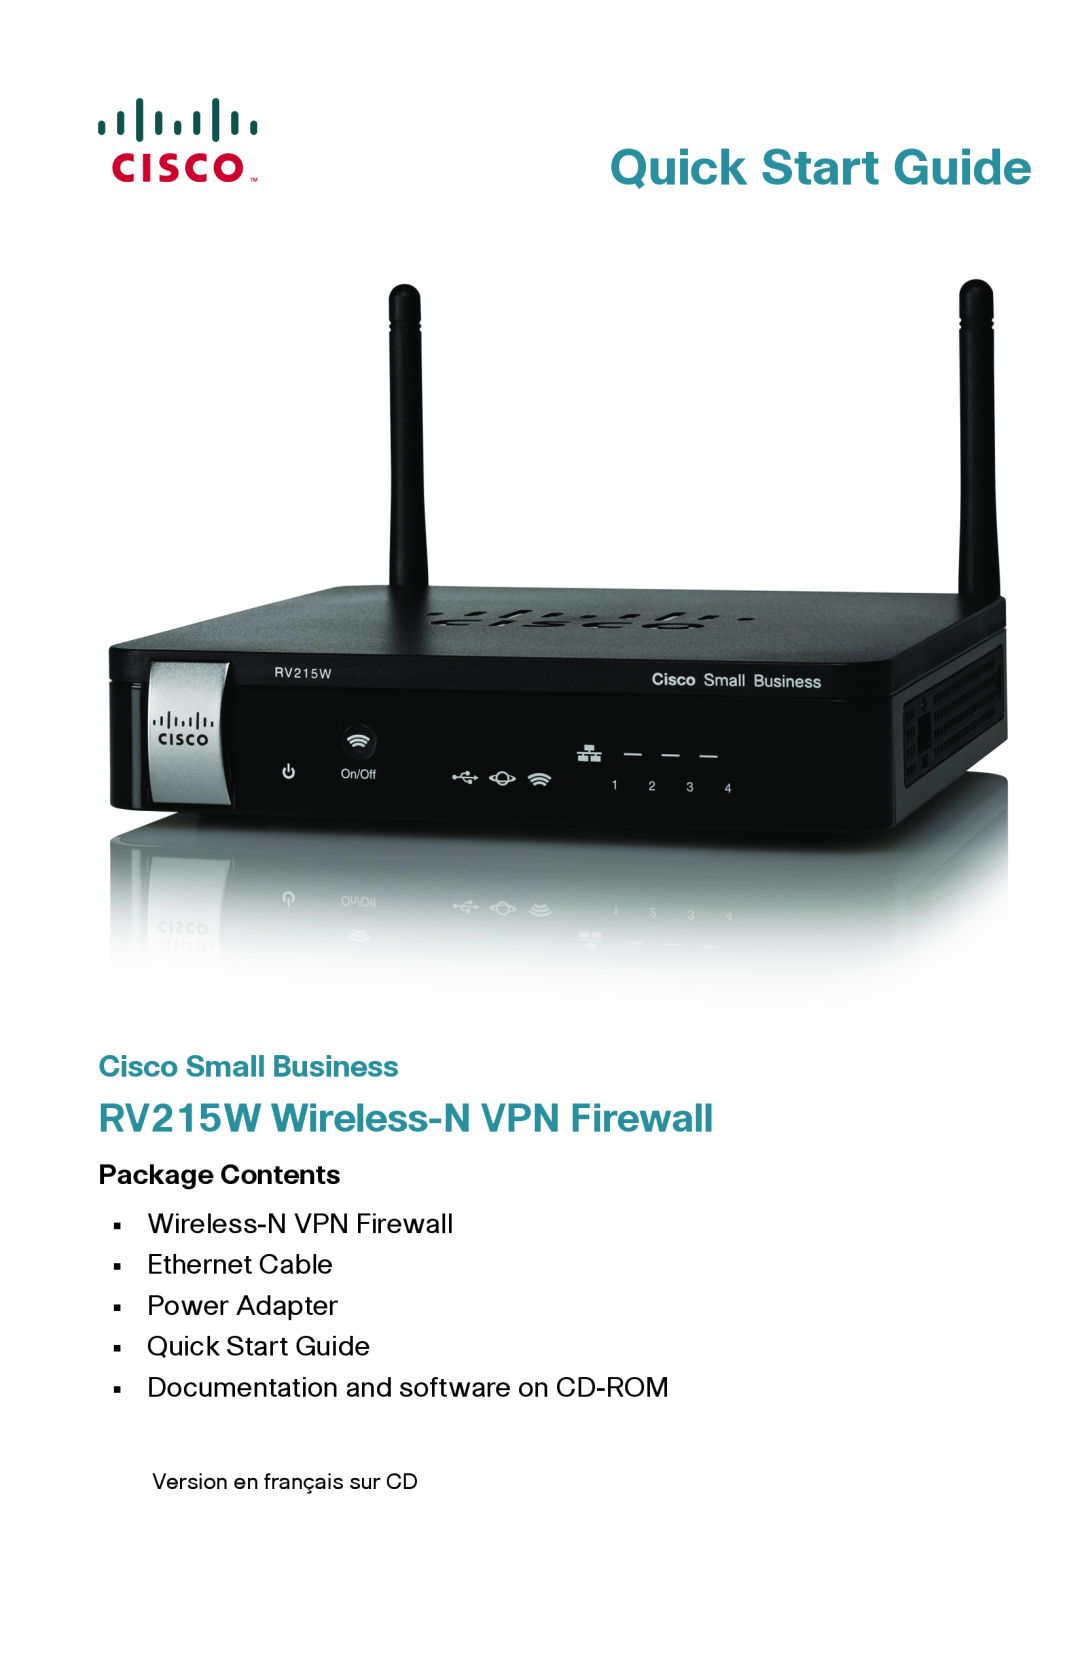 Cisco Systems quick start Cisco Small Business, Package Contents, Quick Start Guide, RV215W Wireless-N VPN Firewall 